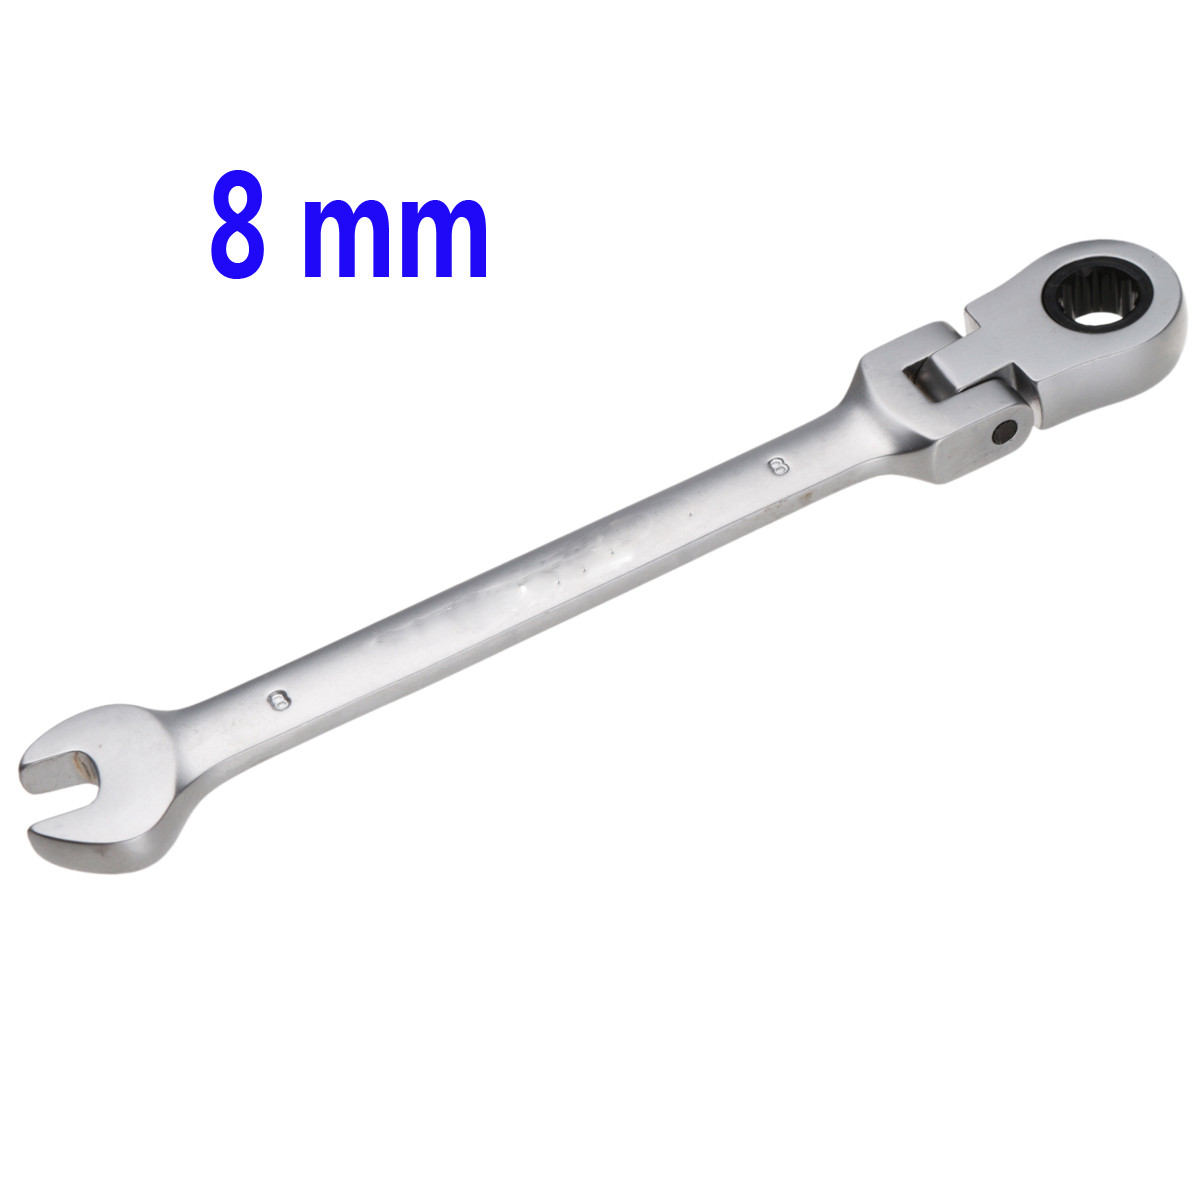 8mm-Reversible-Flexible-Head-Ratchet-Ratcheting-Spanner-Wrench-Socket-Wrenches-Nut-Tool-for-HomeampG-979973